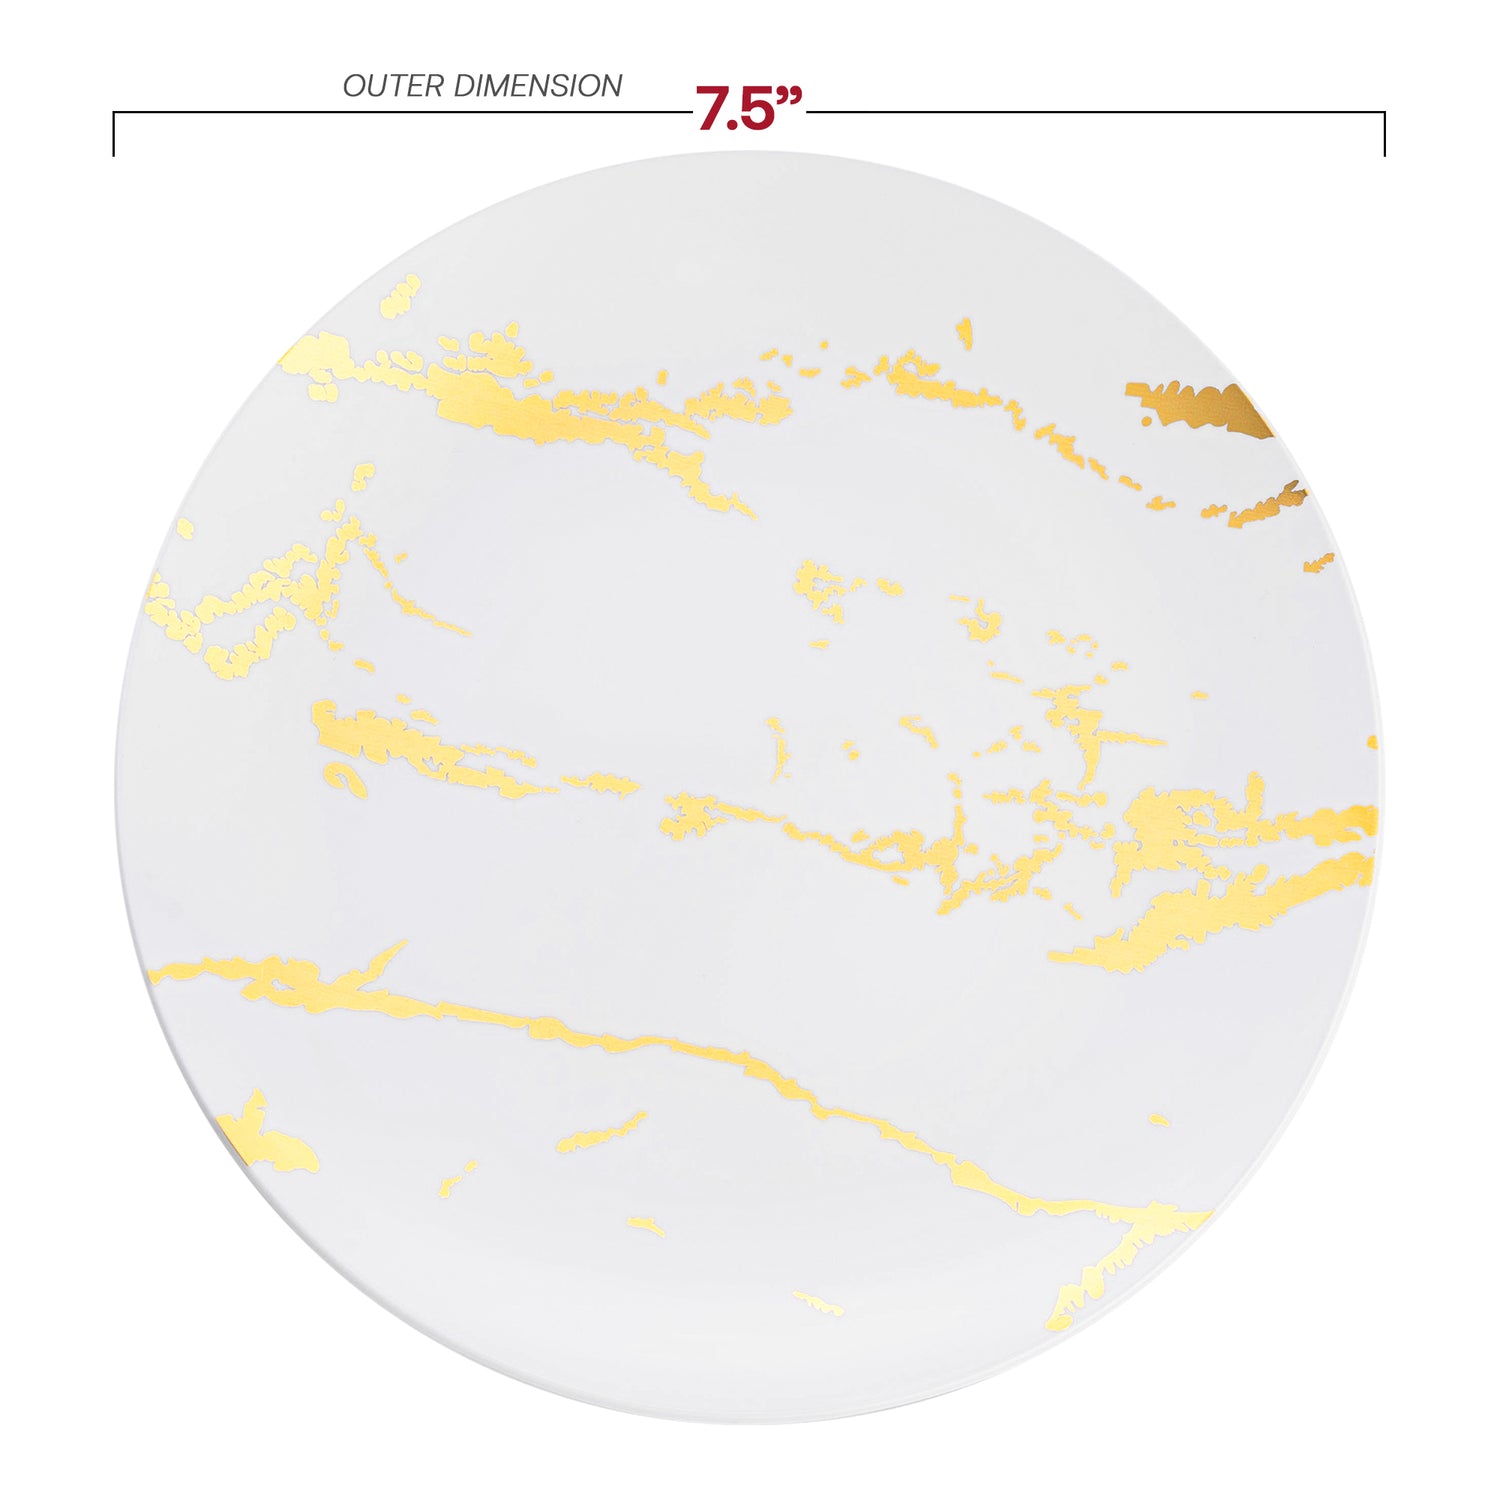 White with Gold Marble Stroke Round Disposable Plastic Appetizer/Salad Plates (7.5") Dimension | The Kaya Collection